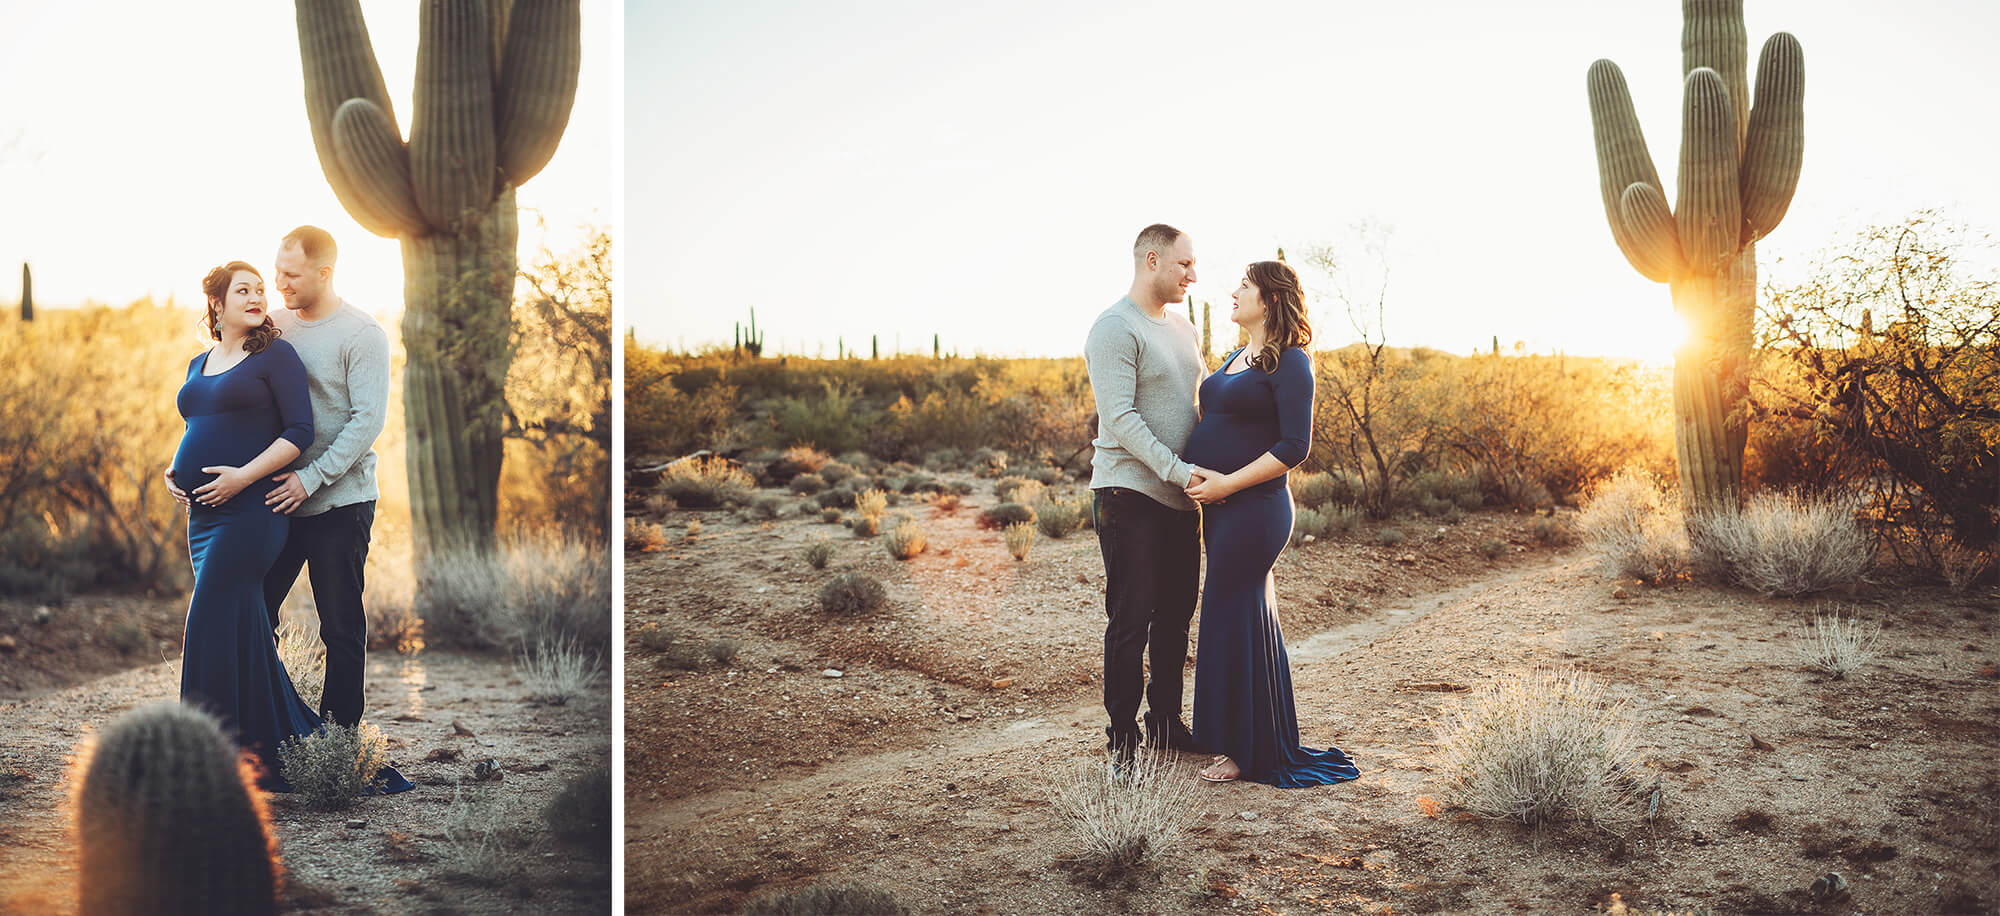 The final moment of sunset for this couple's maternity session.